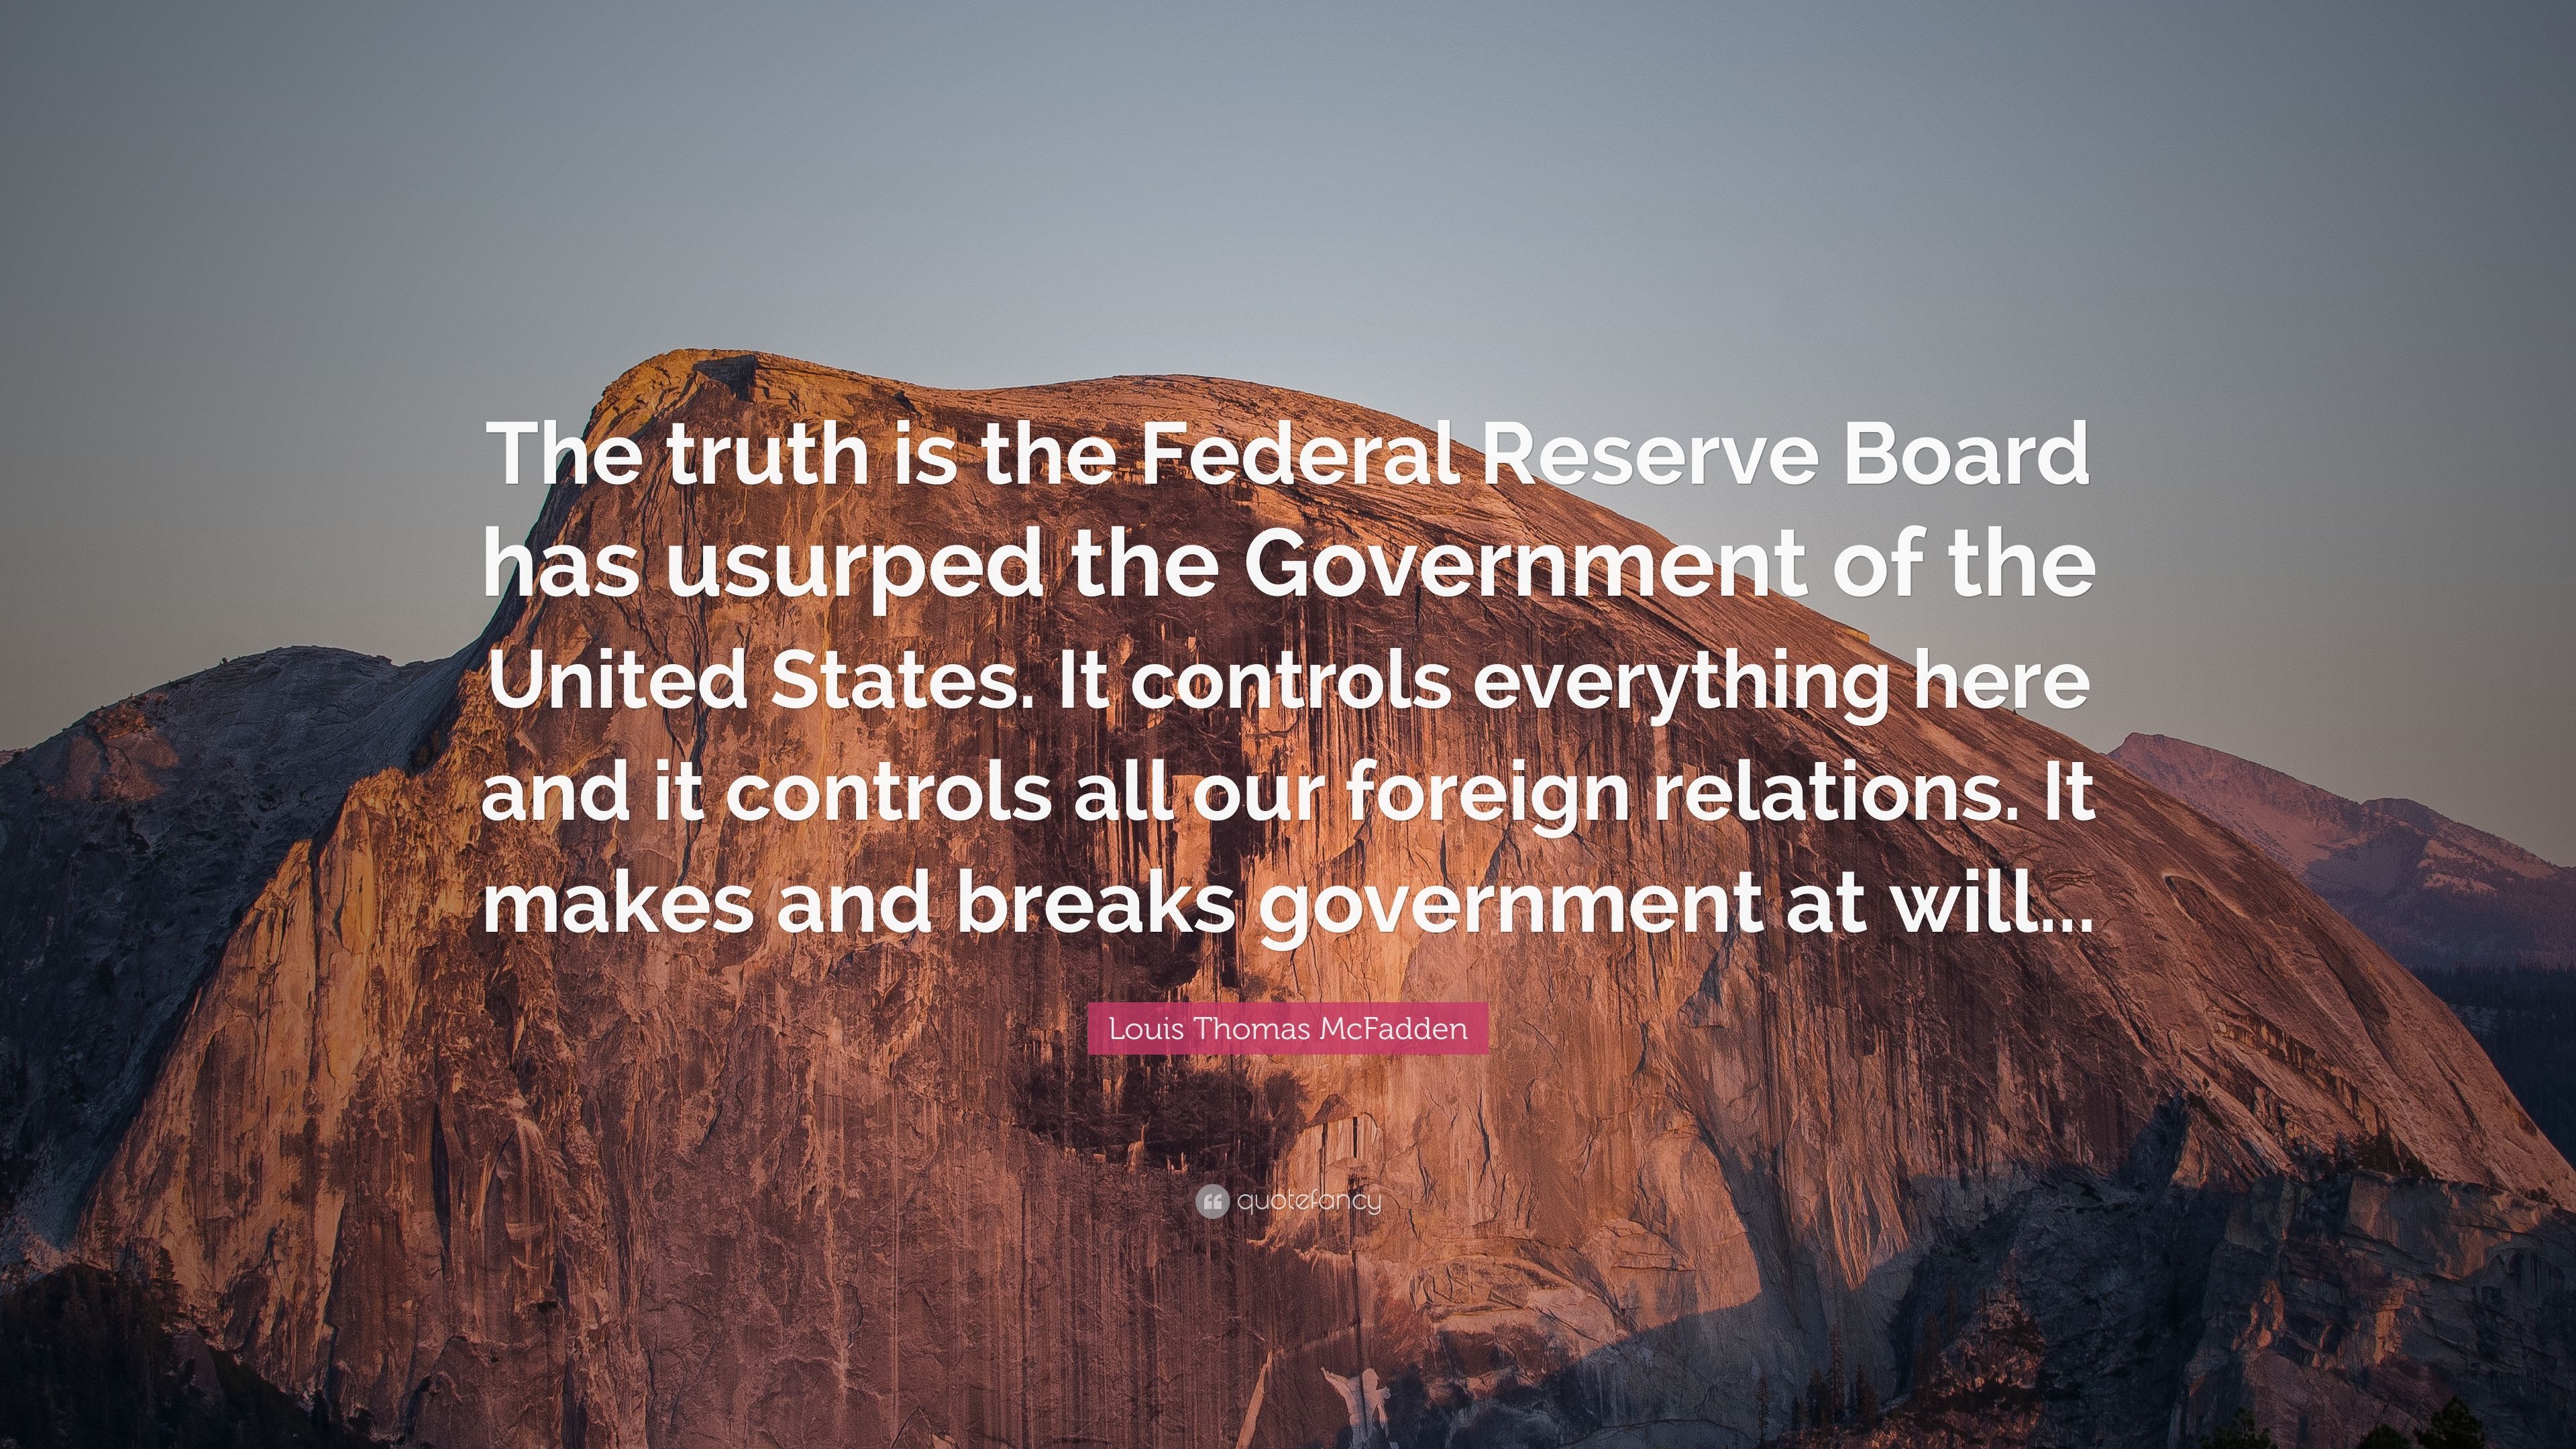 Louis Thomas McFadden Quote: “The truth is the Federal Reserve Board